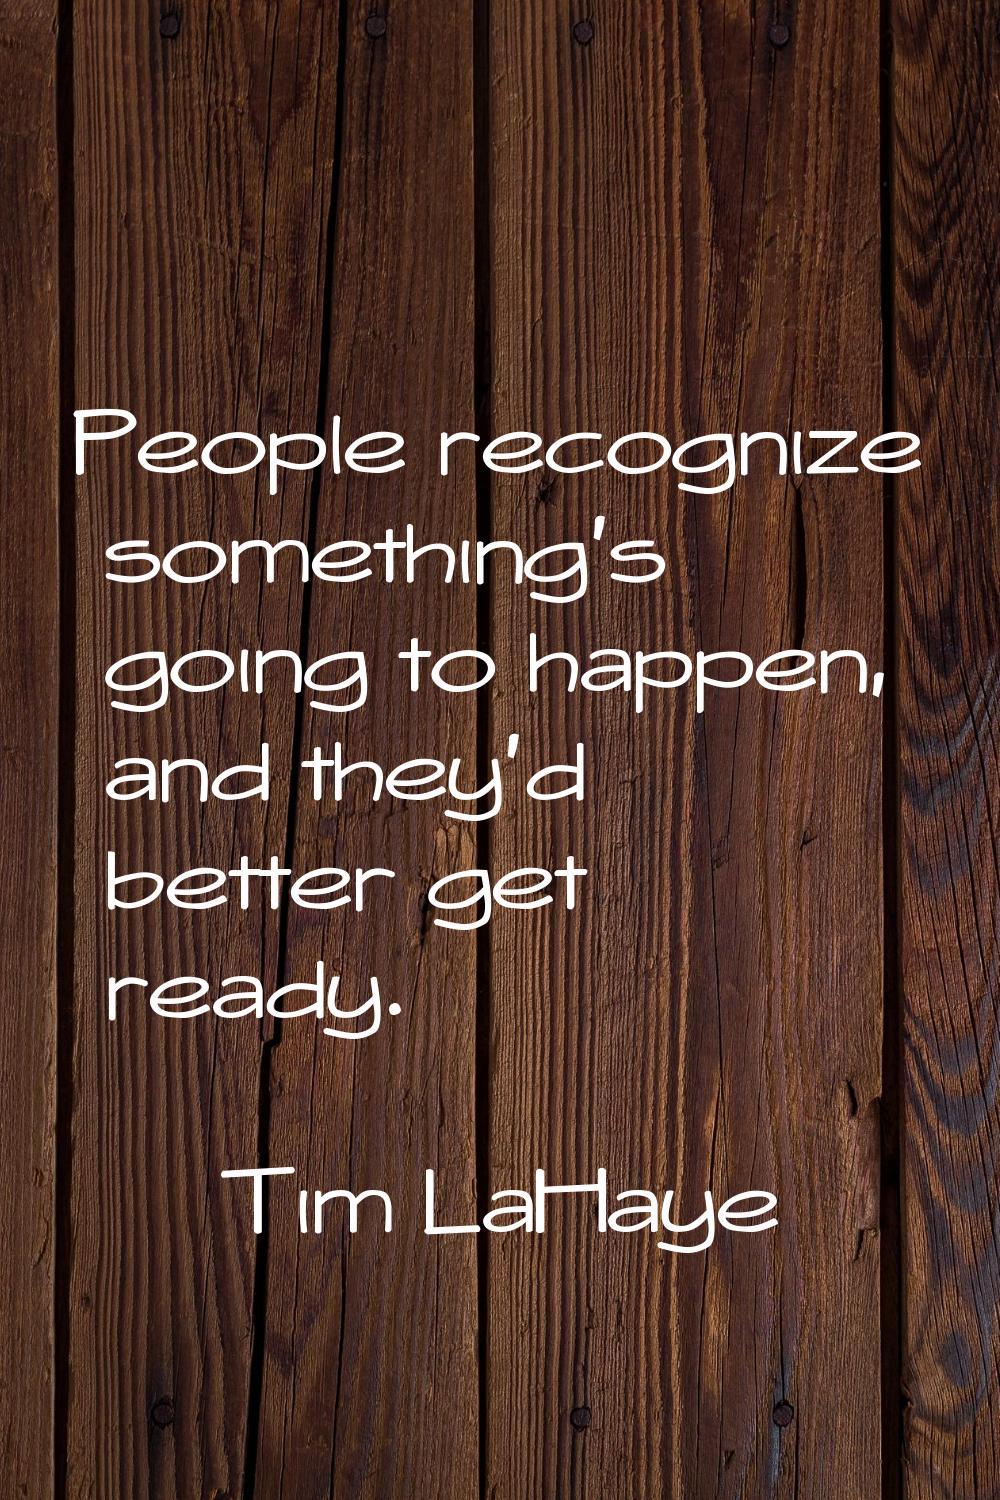 People recognize something's going to happen, and they'd better get ready.